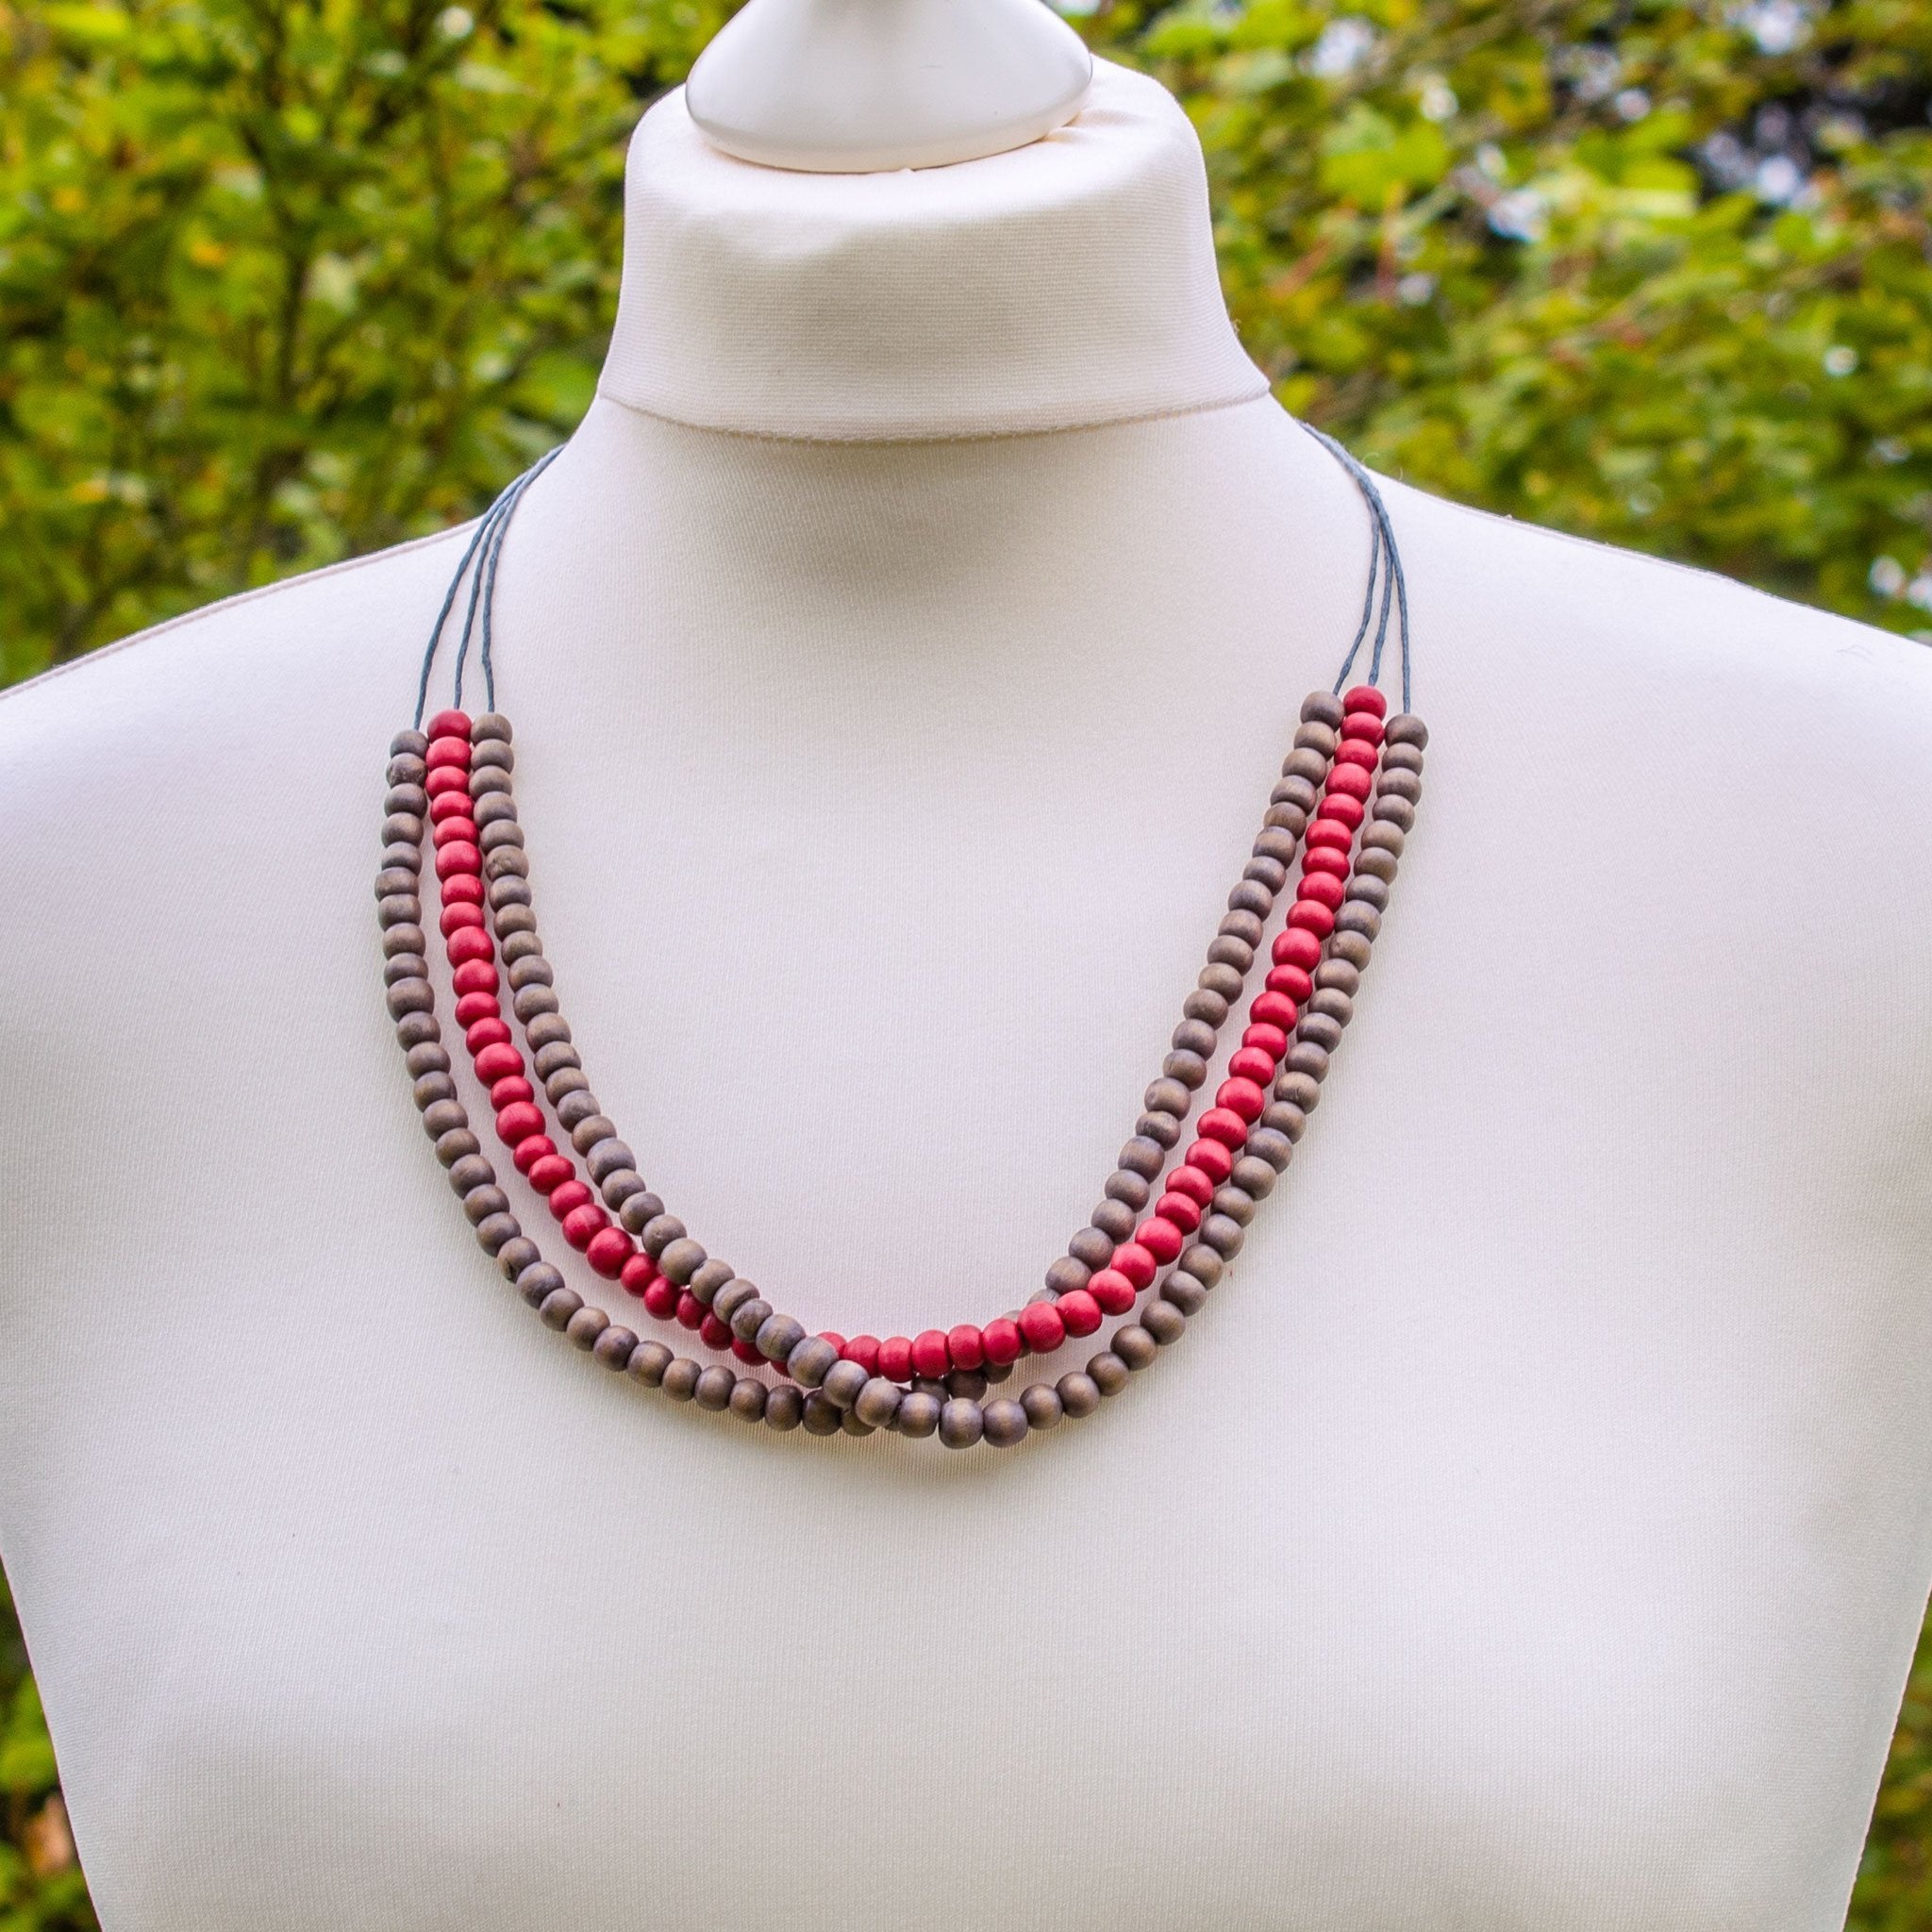 Add some flair with a DIY painted wood bead necklace